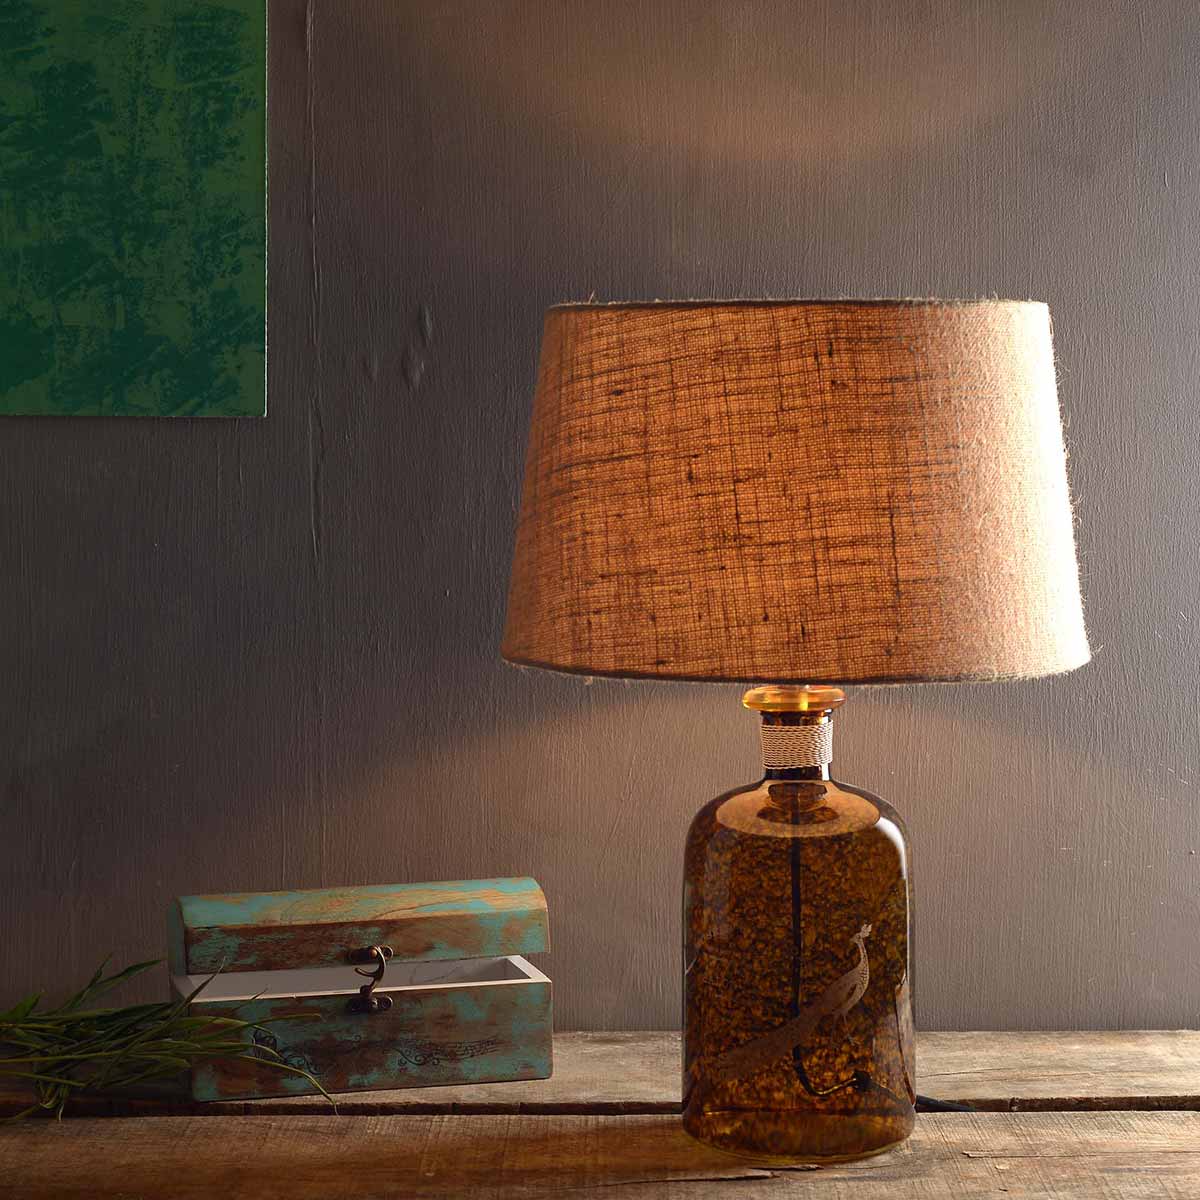 Night table lamps